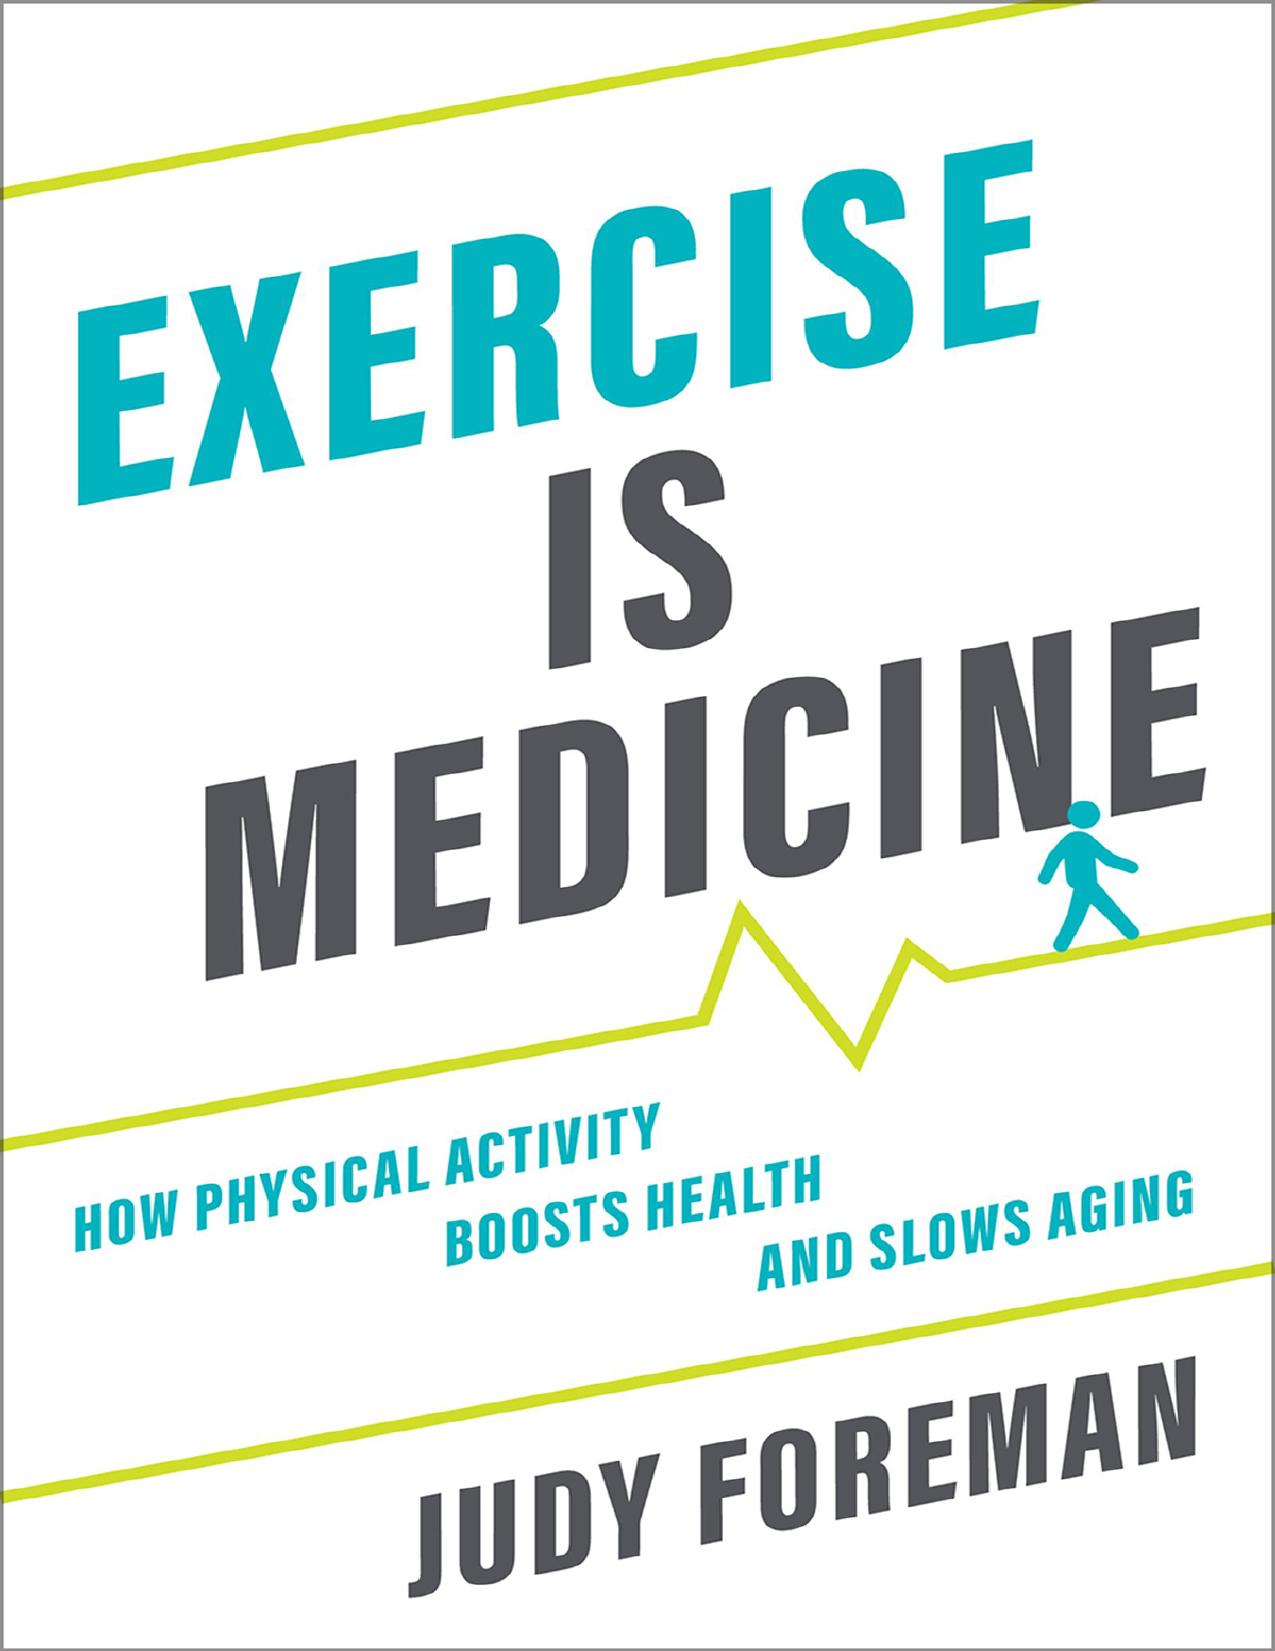 Exercise is Medicine by Judy Foreman